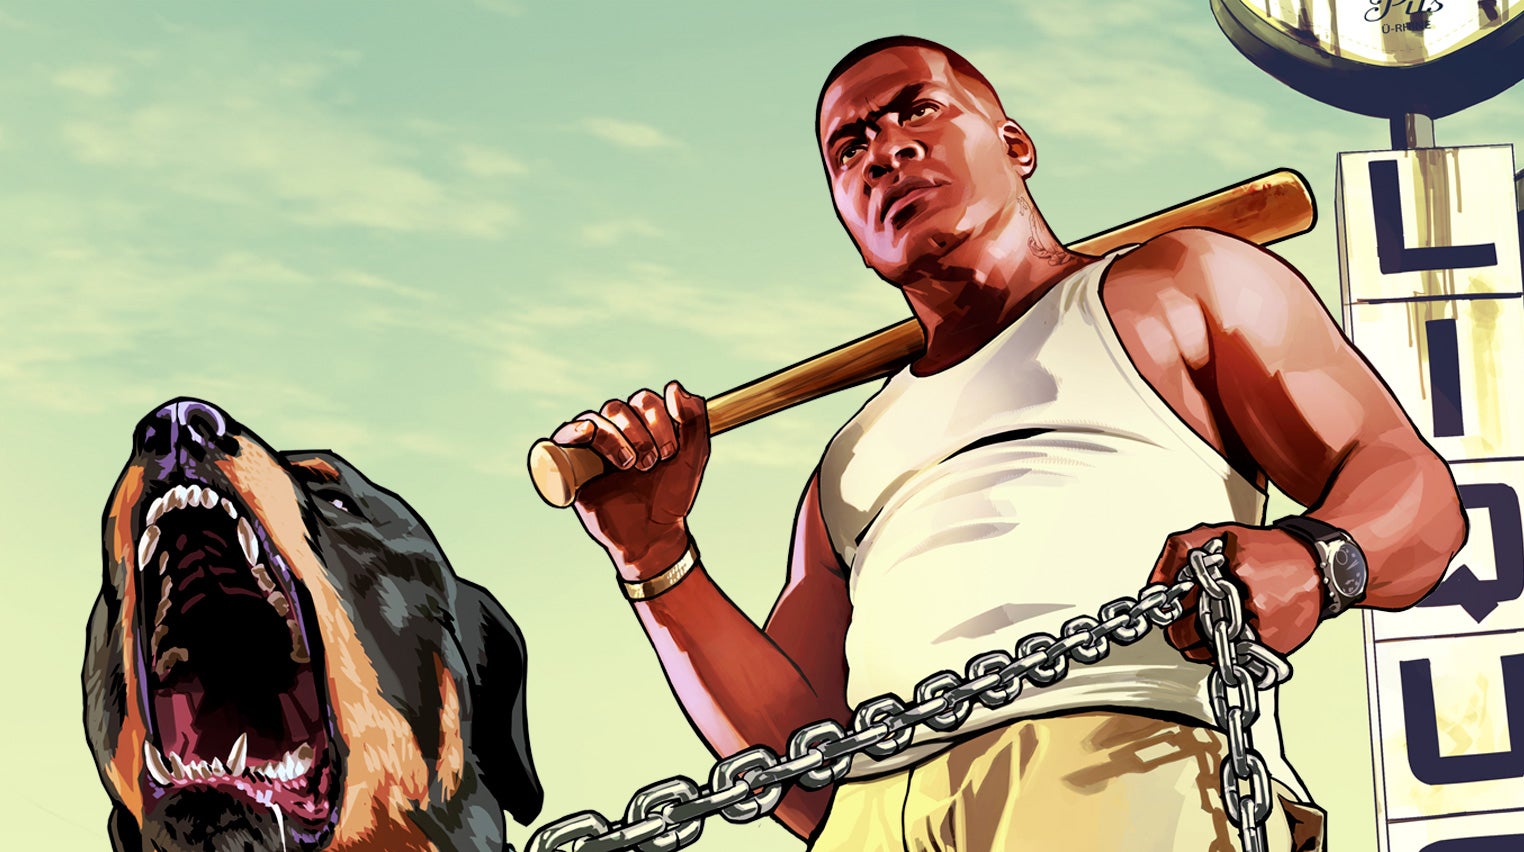 Image for GTA 5 arrives on PS5 and Xbox Series S|X: a roundup of pieces to read